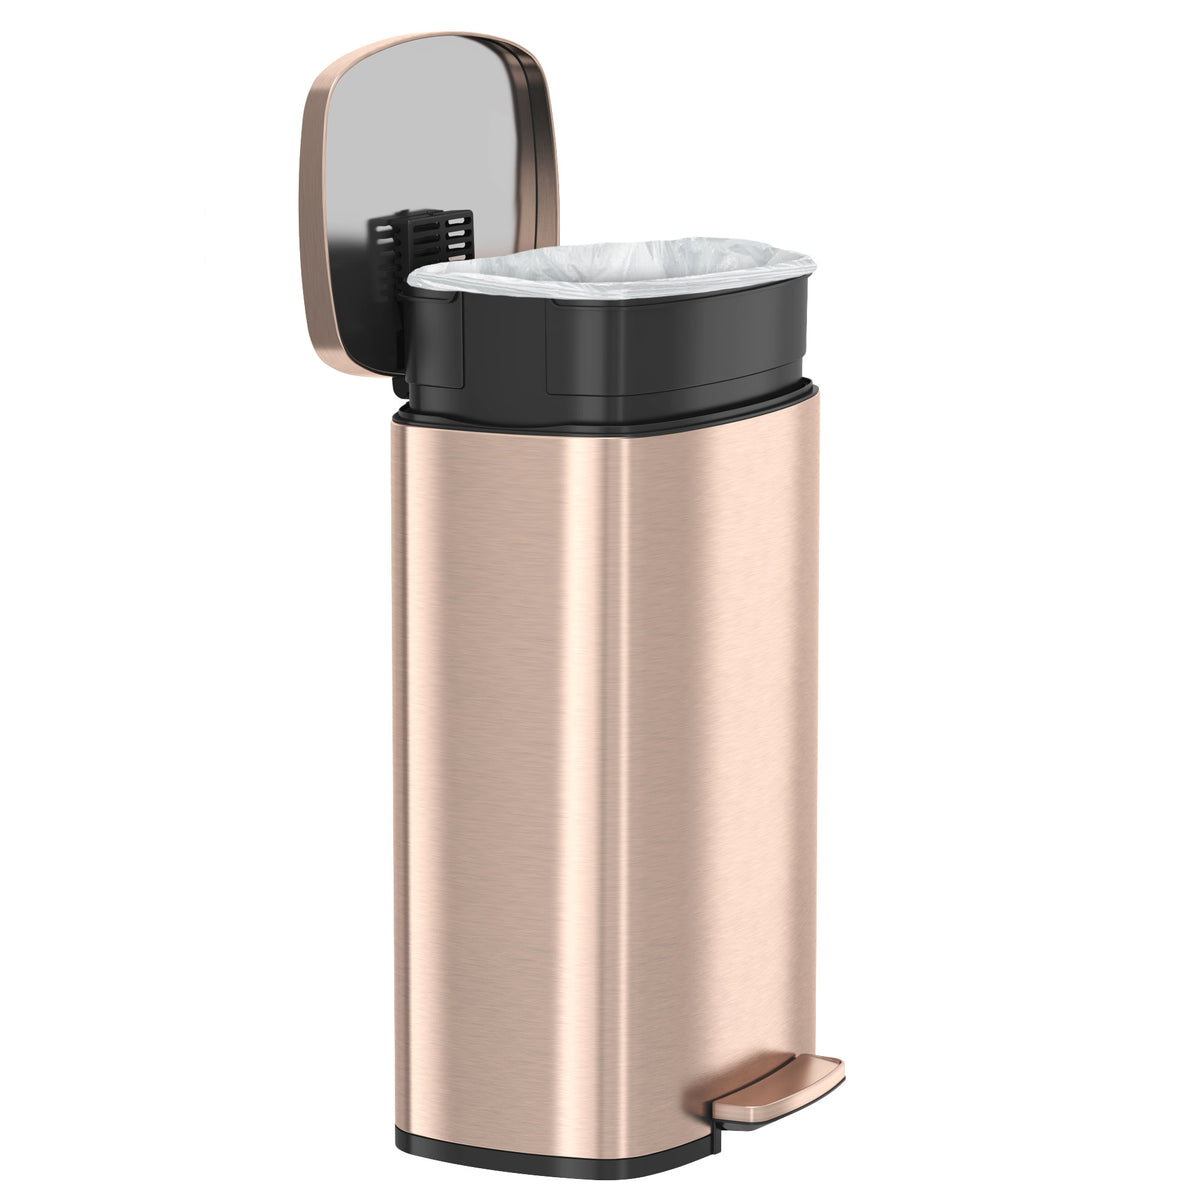 13.2 Gallon / 50 Liter SoftStep Rose Gold Step Pedal Trash Can with removable inner bucket